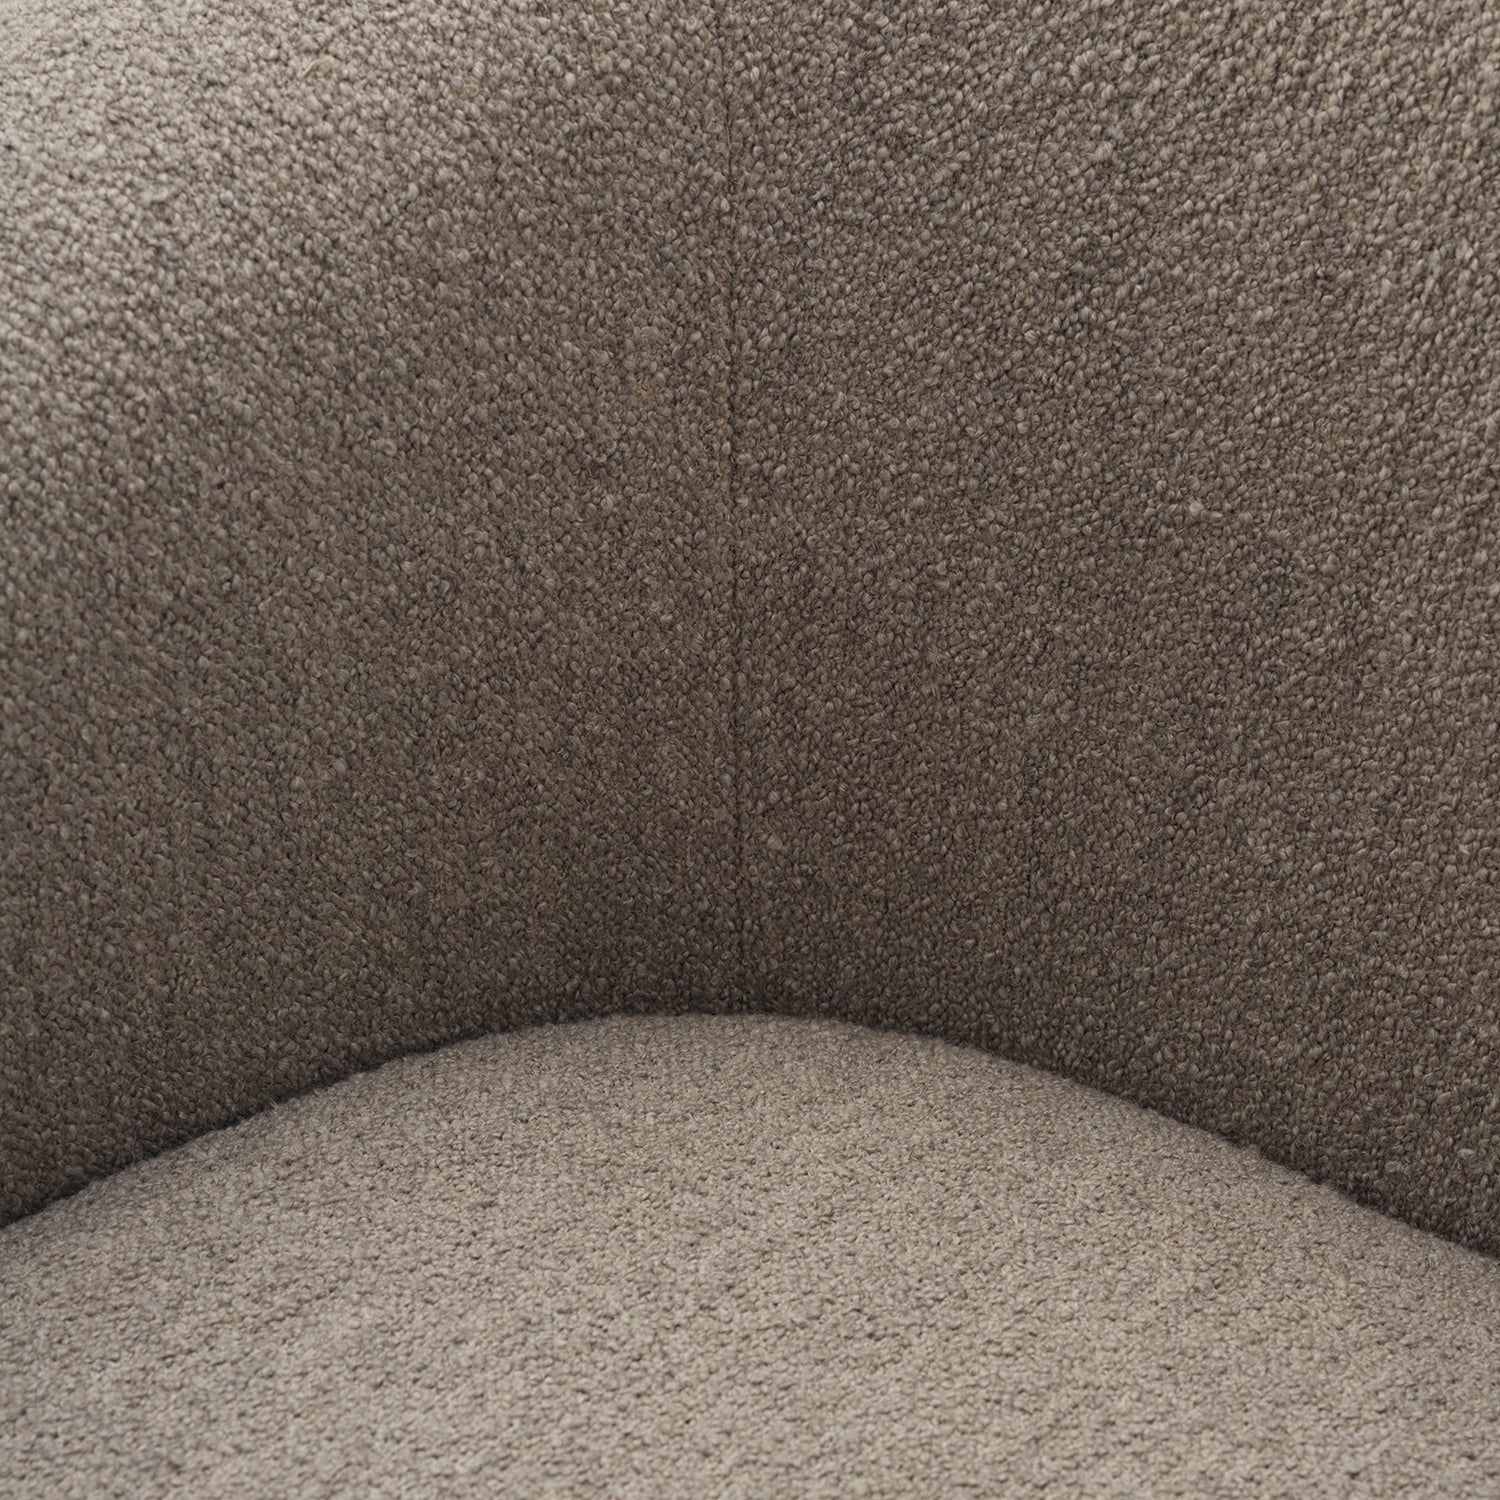 New Works Covent Lounge Chair in hemp close up